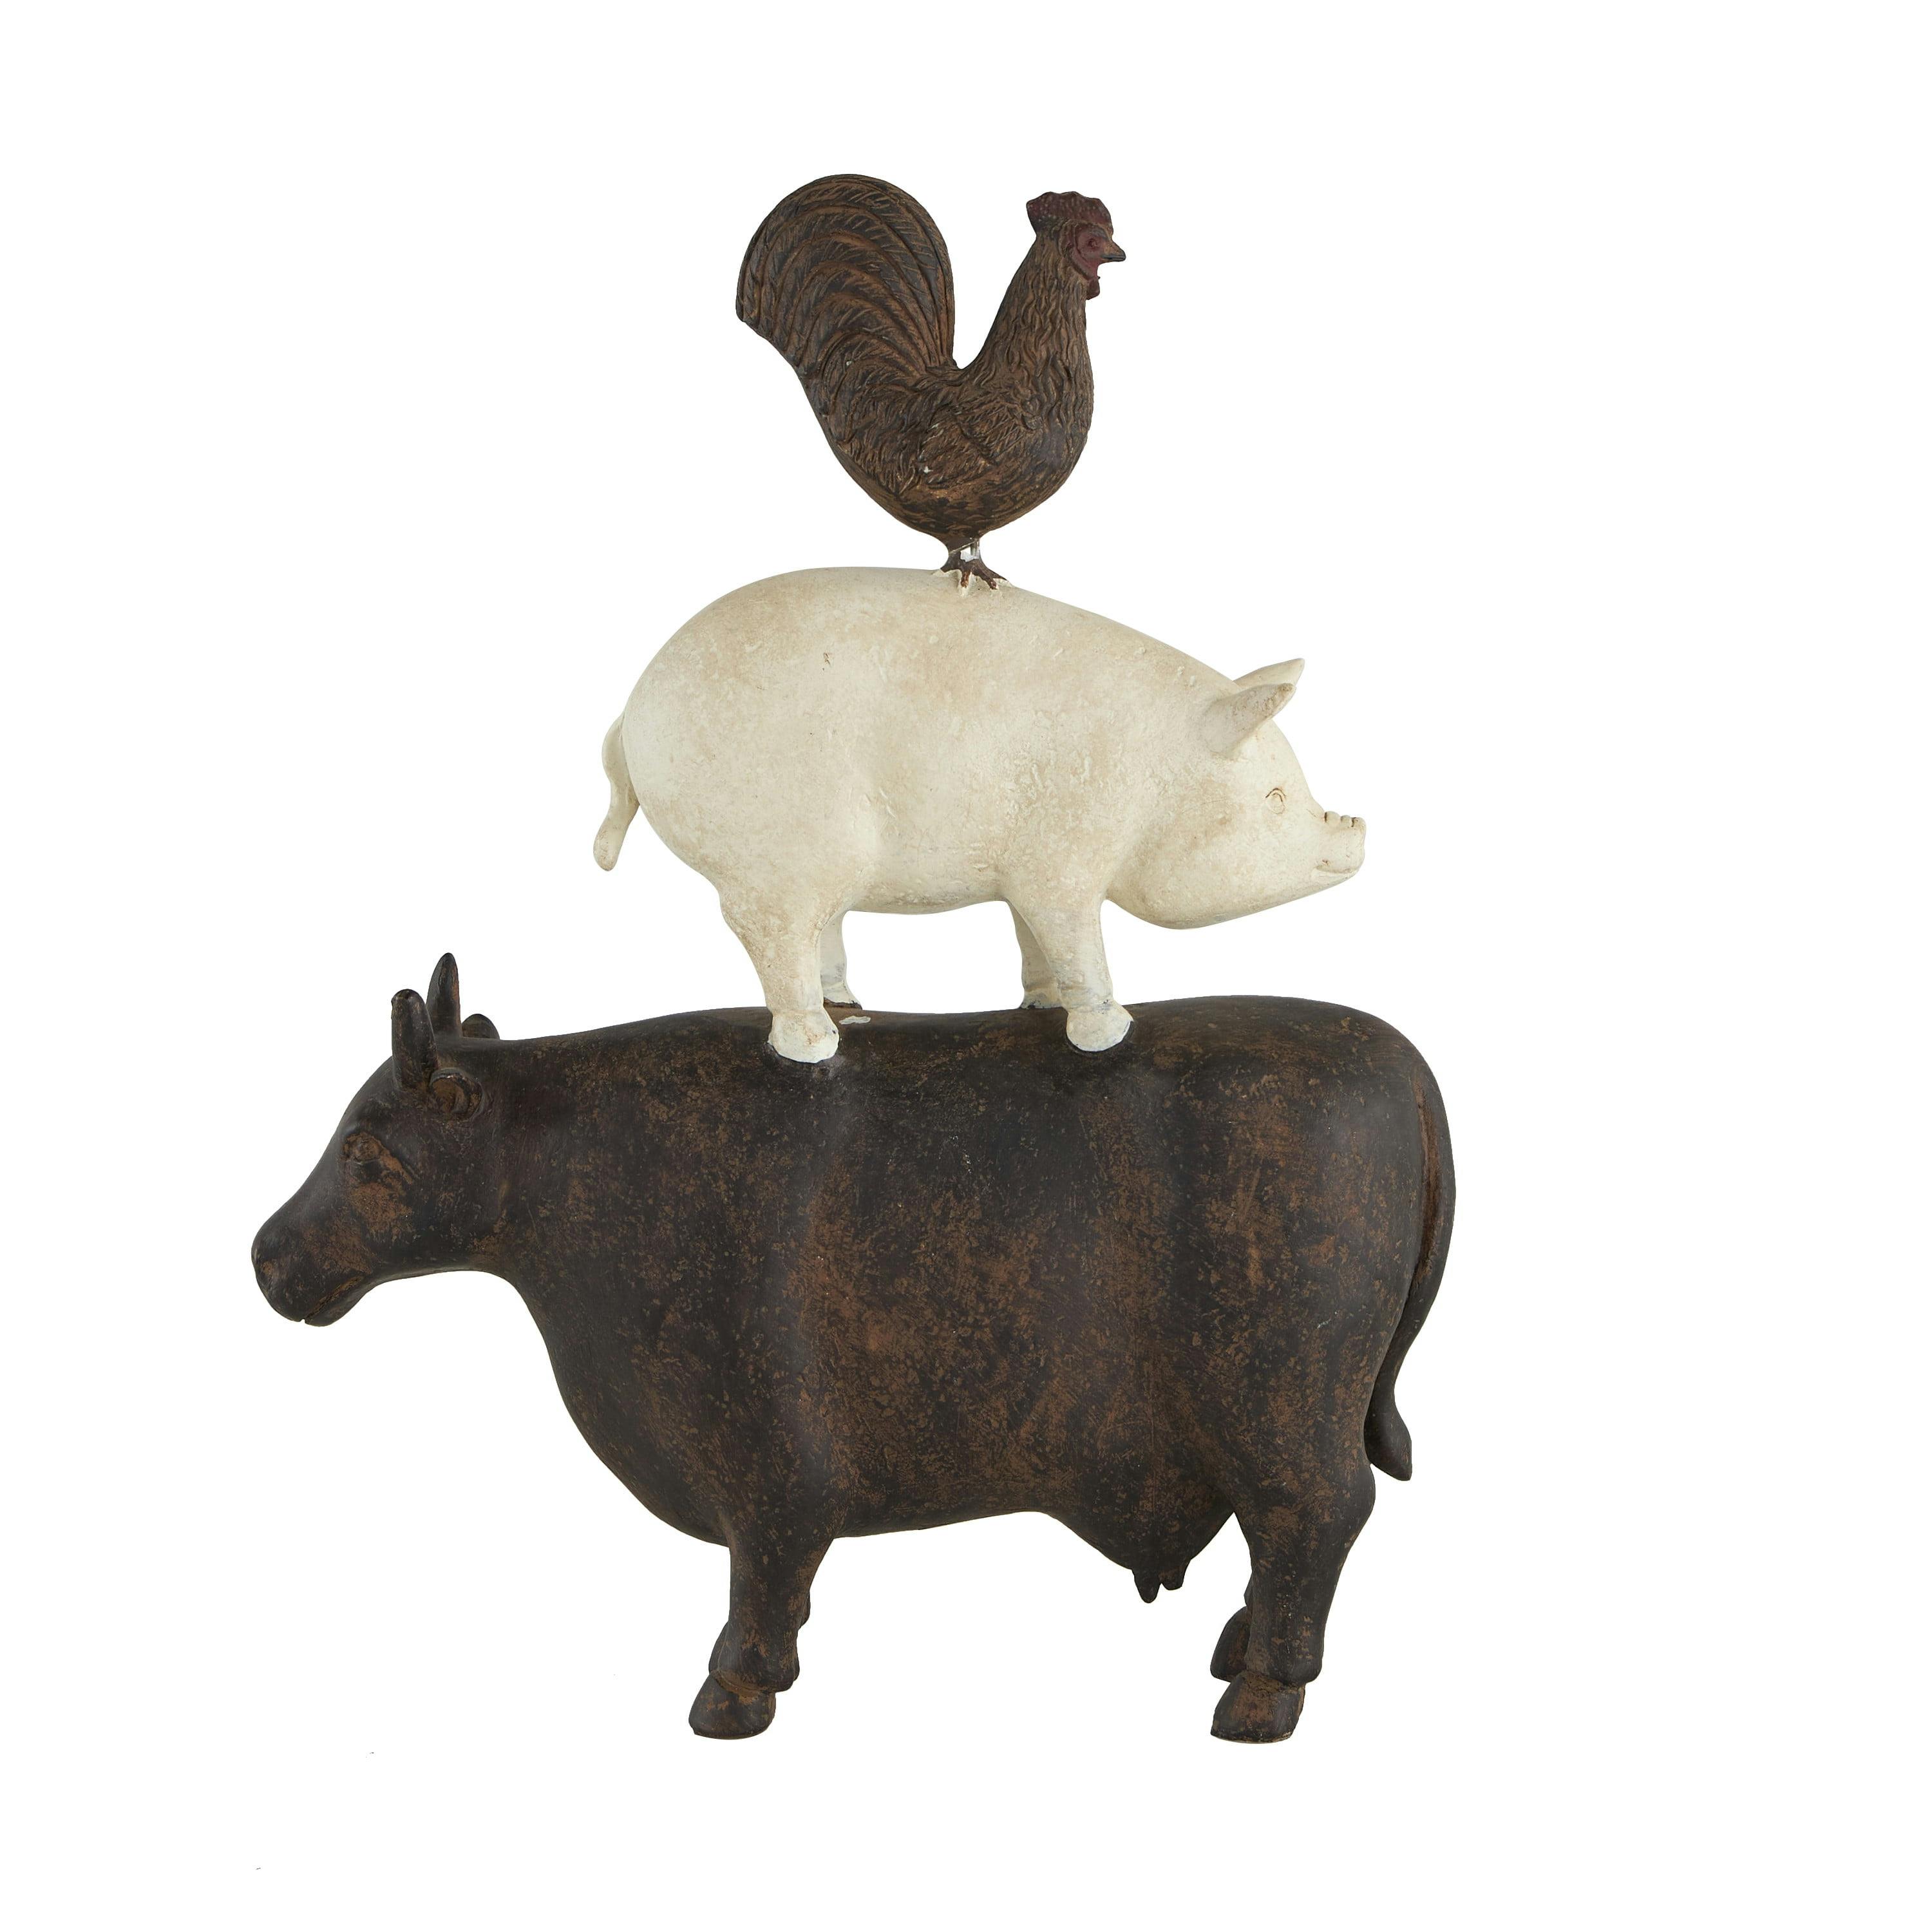 Rustic Farmhouse Resin Animal Stack Statue (11"x14") - Brown